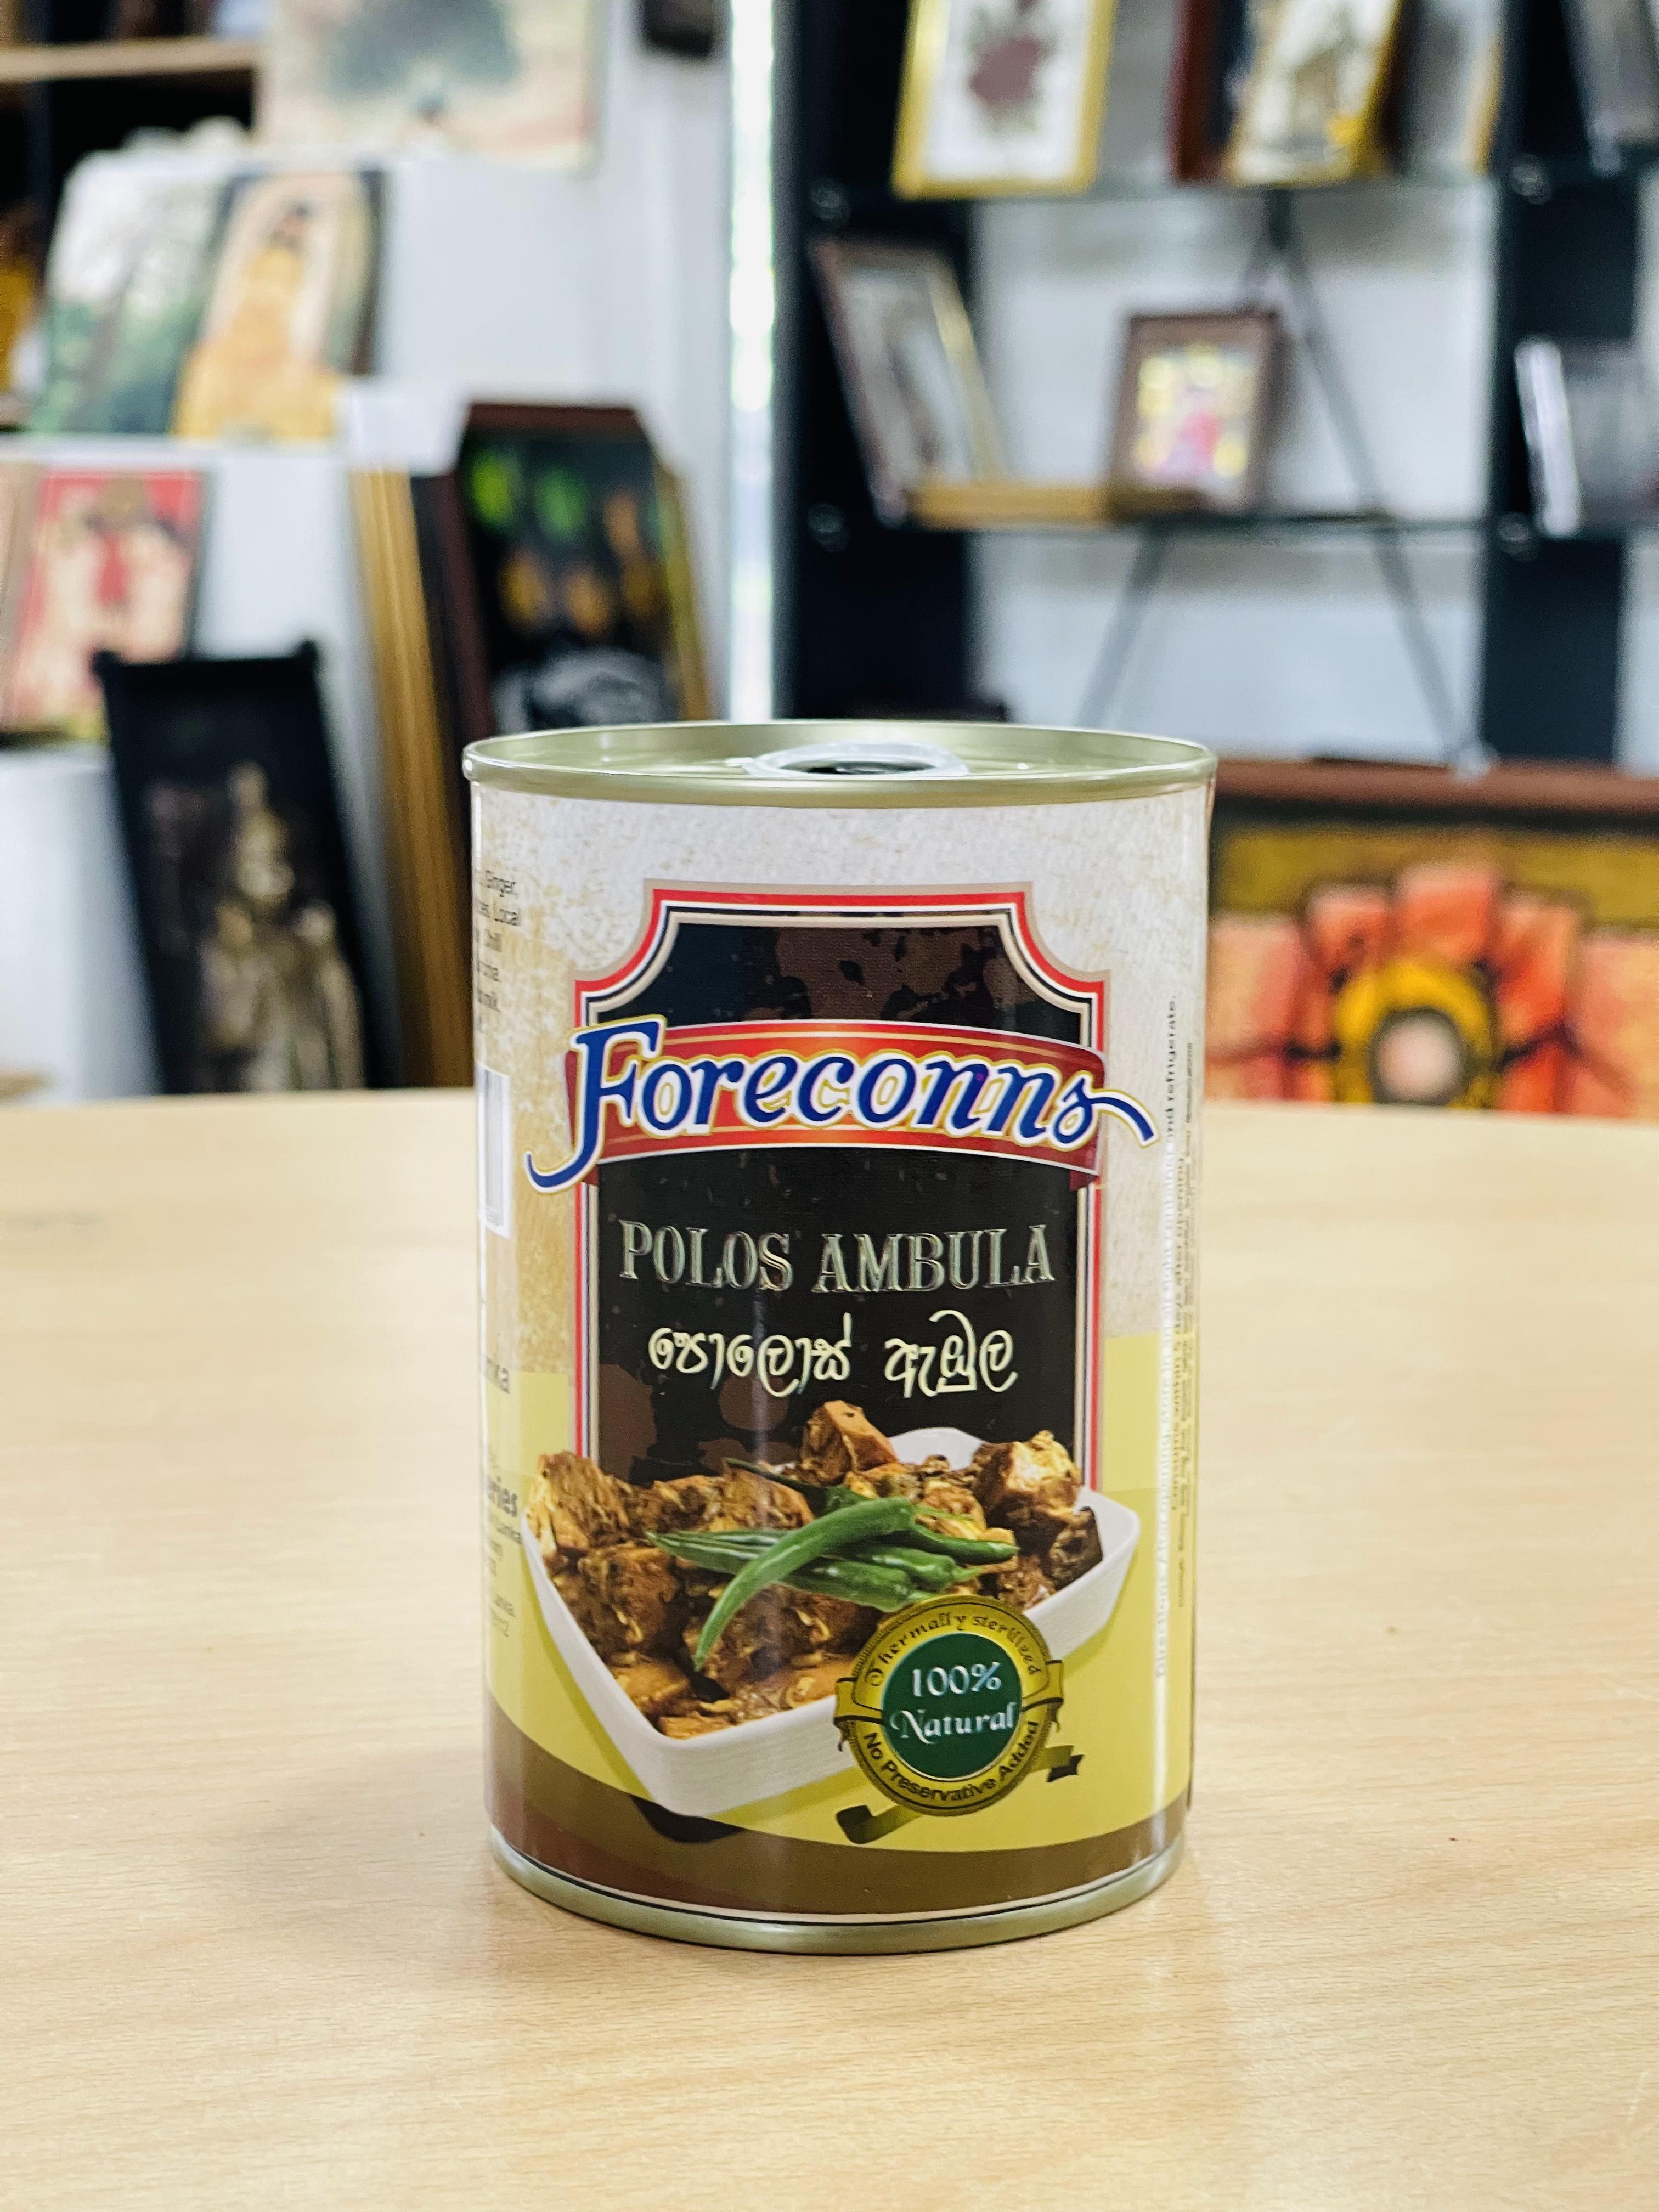 Foreconns Canned Polos Ambula